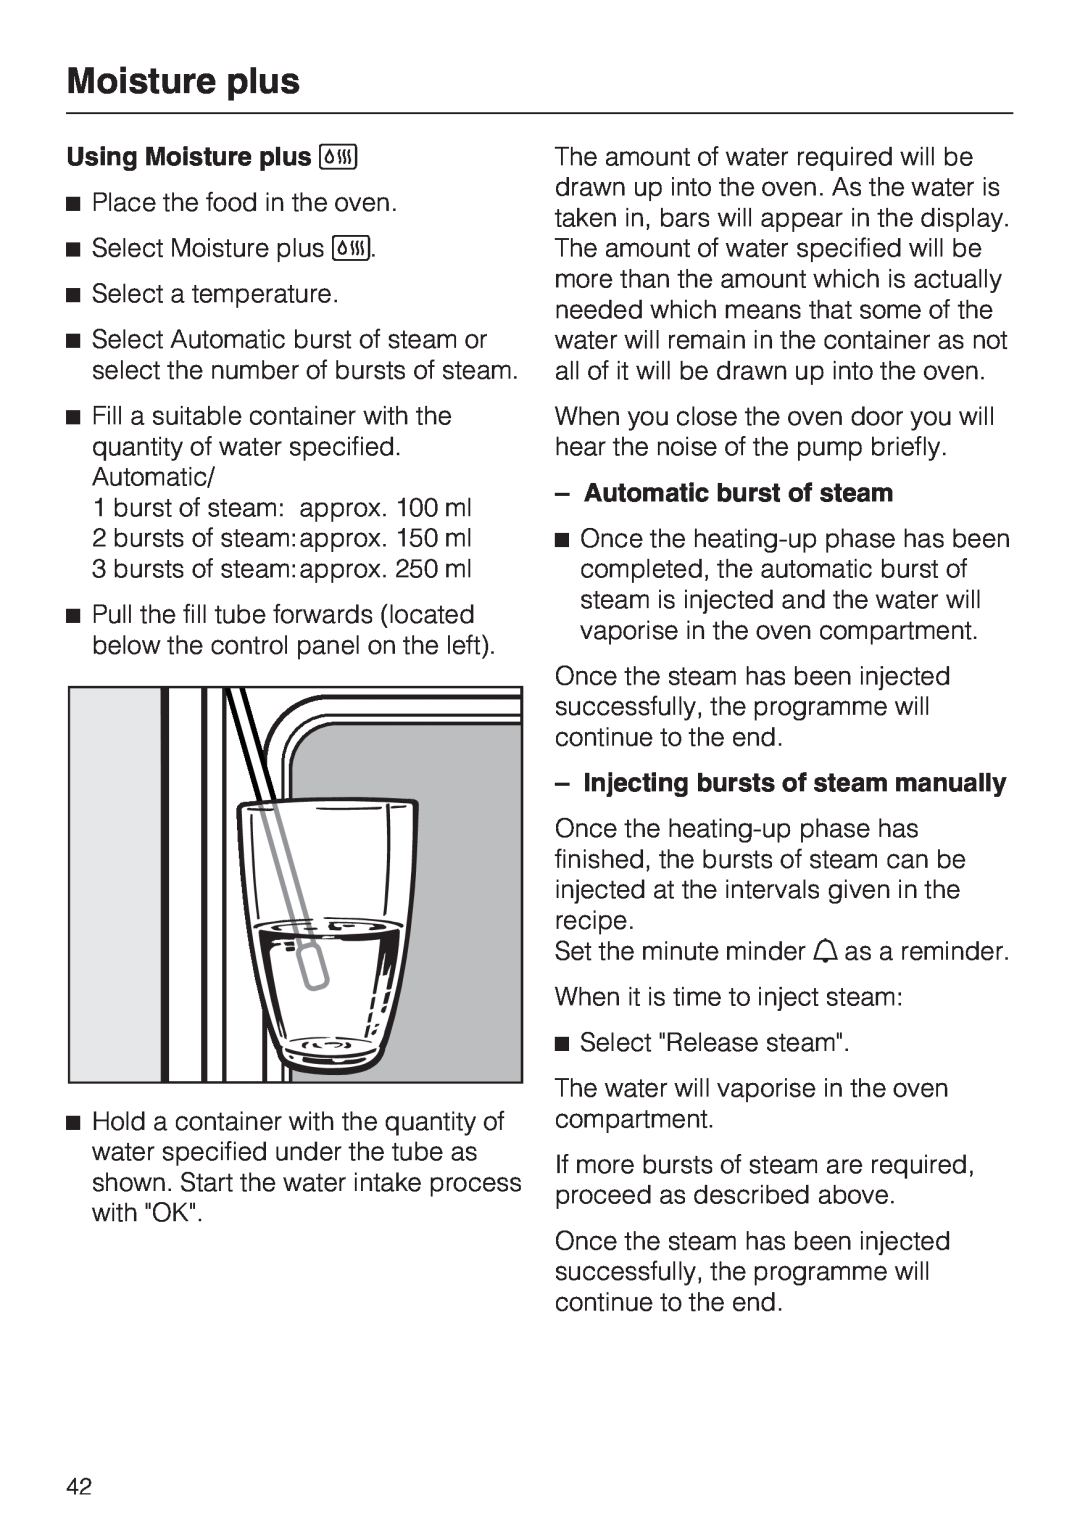 Miele H 5961 B installation instructions Using Moisture plus, Automatic burst of steam, Injecting bursts of steam manually 